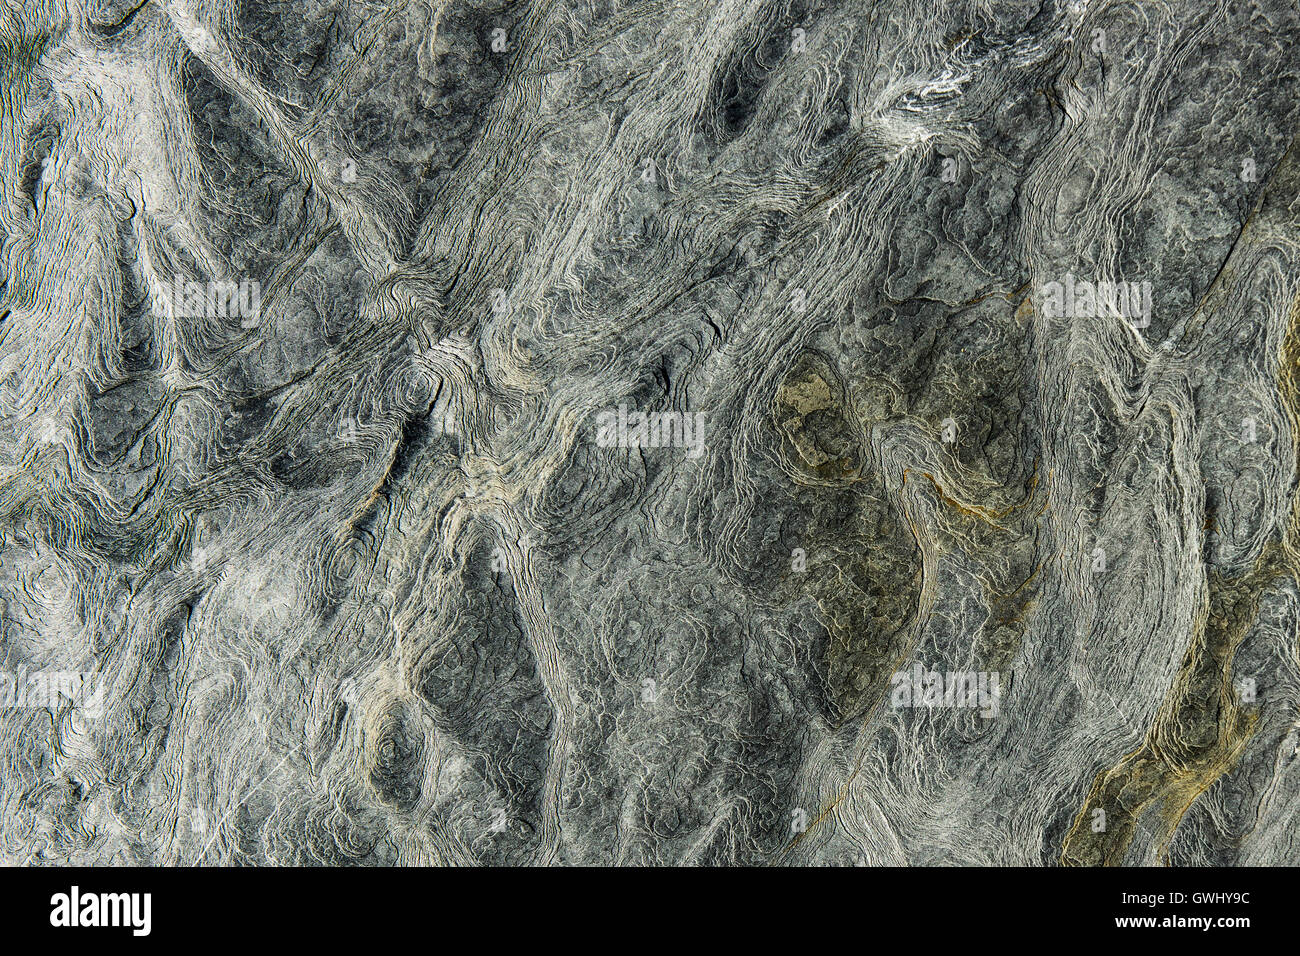 Closeup view of marks, lines and patterns in the eroded surface rock. Stock Photo